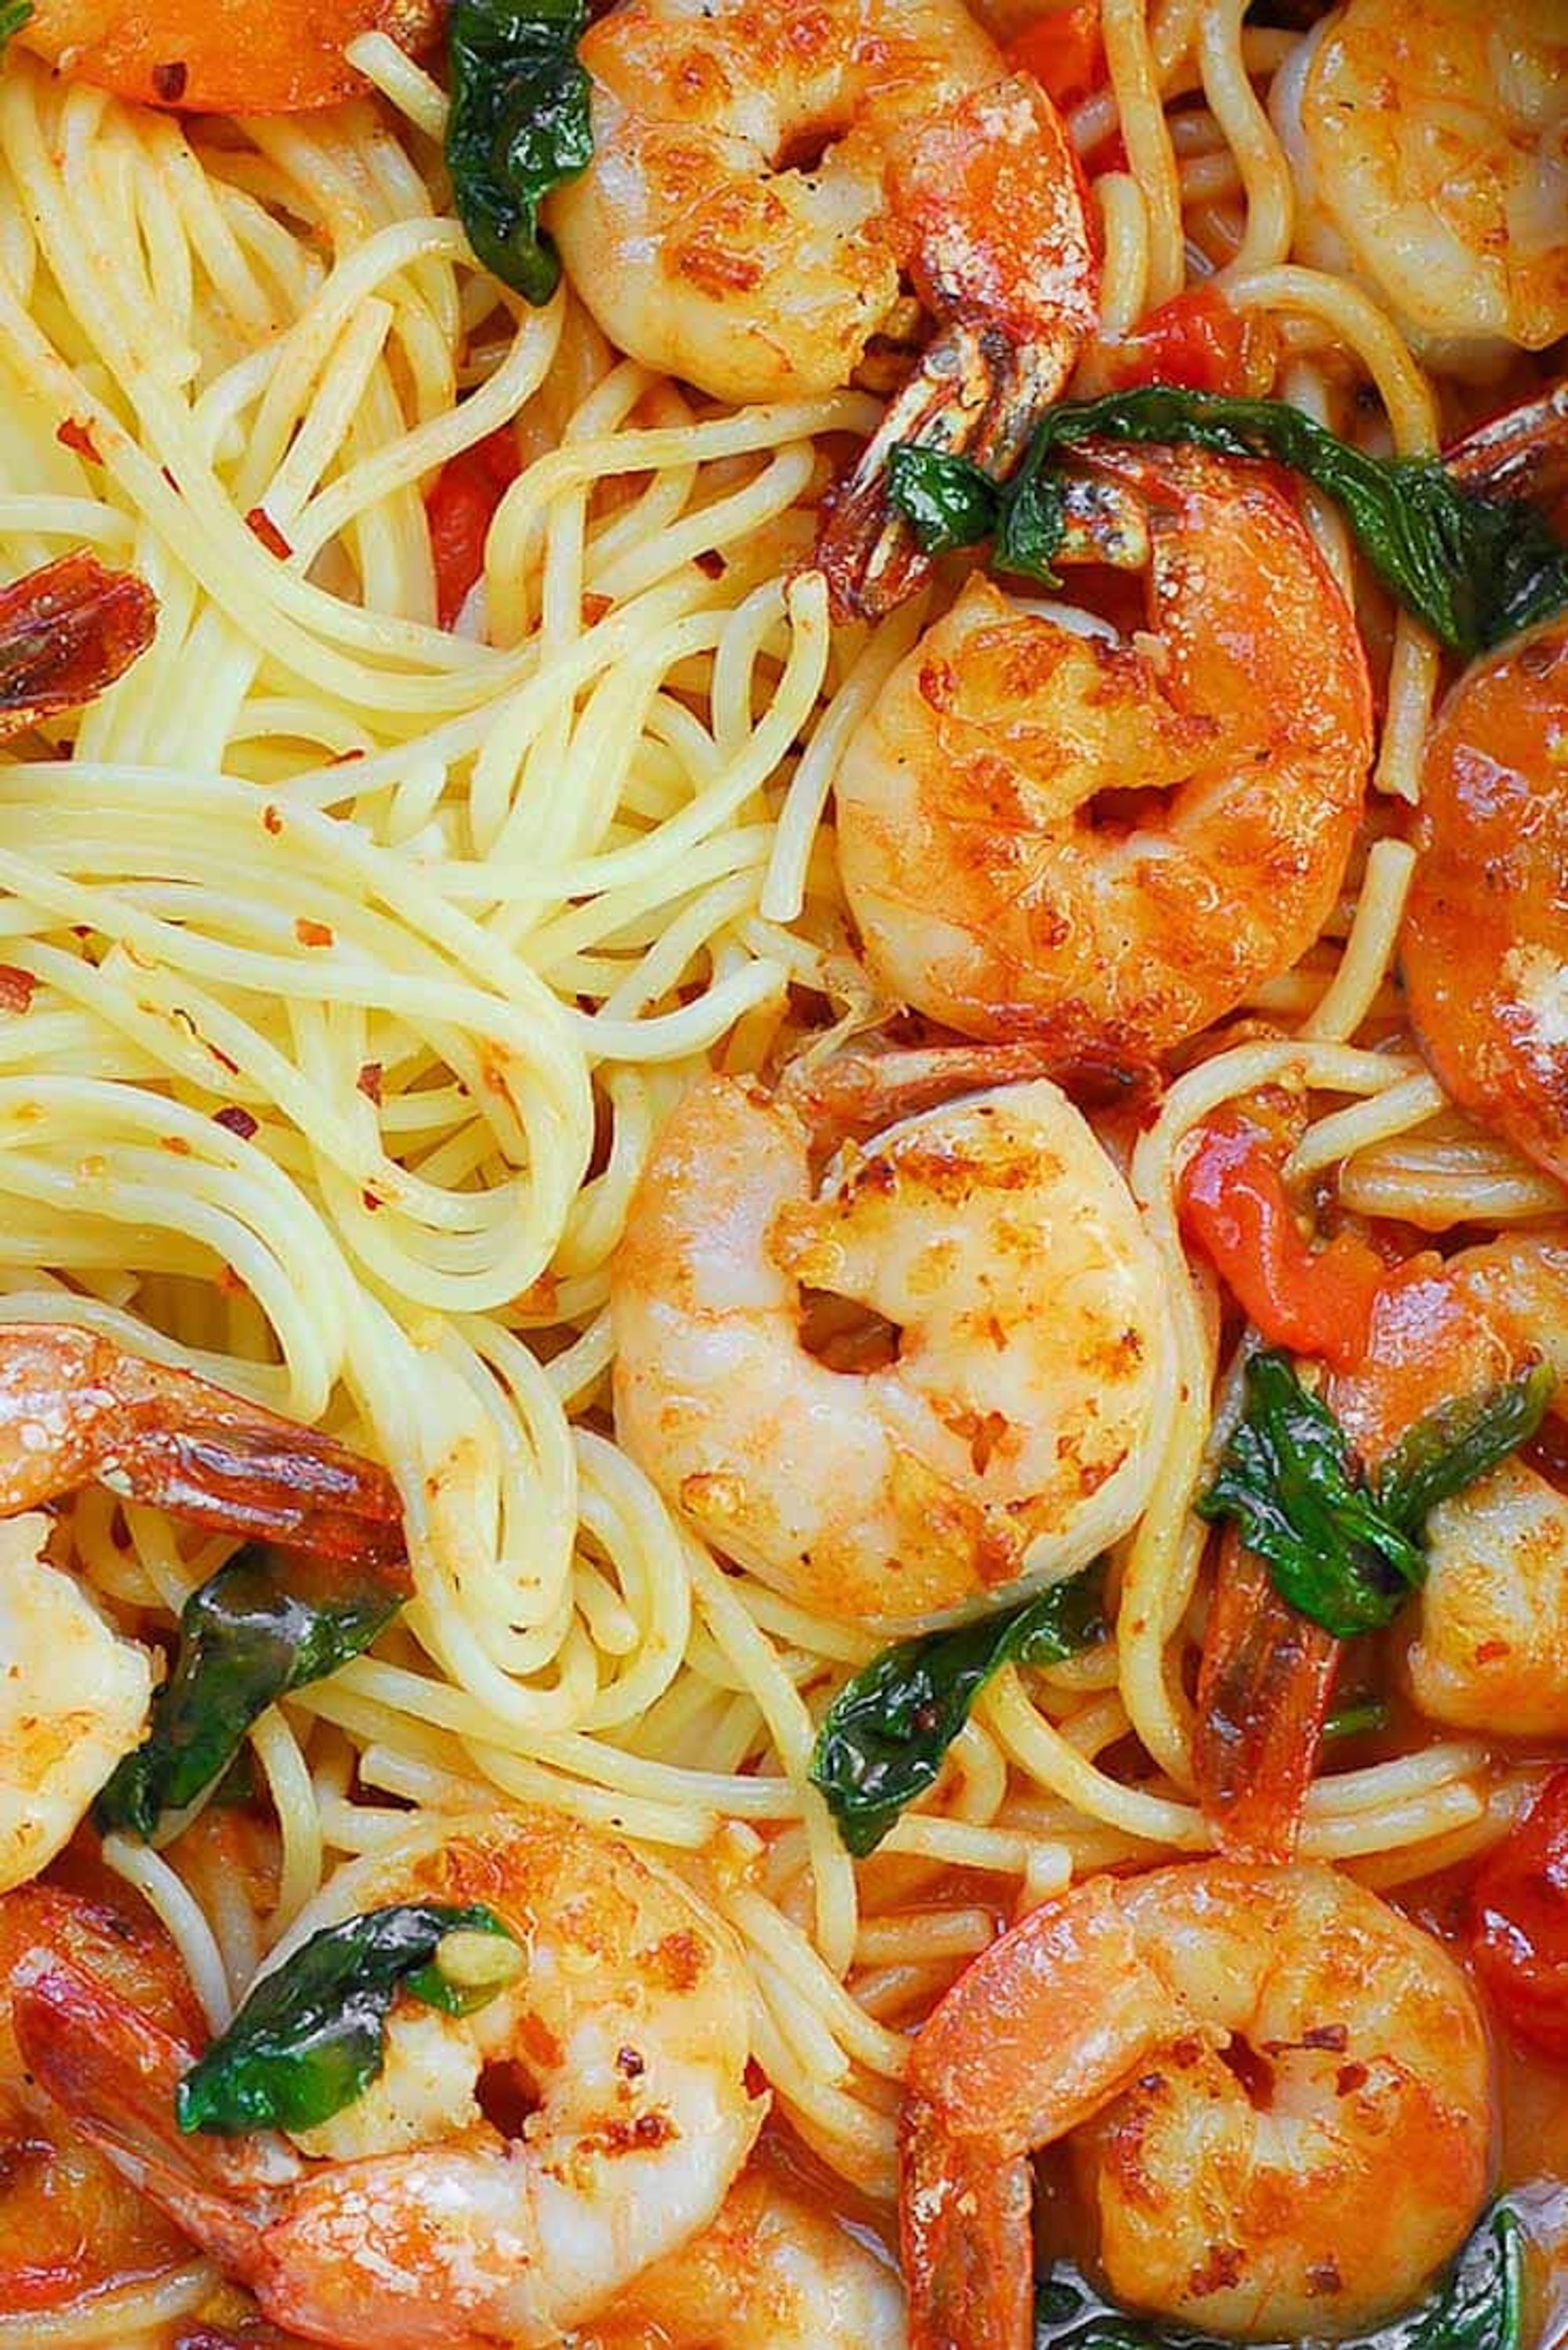 Garlic Shrimp Pasta in Red Wine Tomato Sauce - What's In The Pan? - My ...